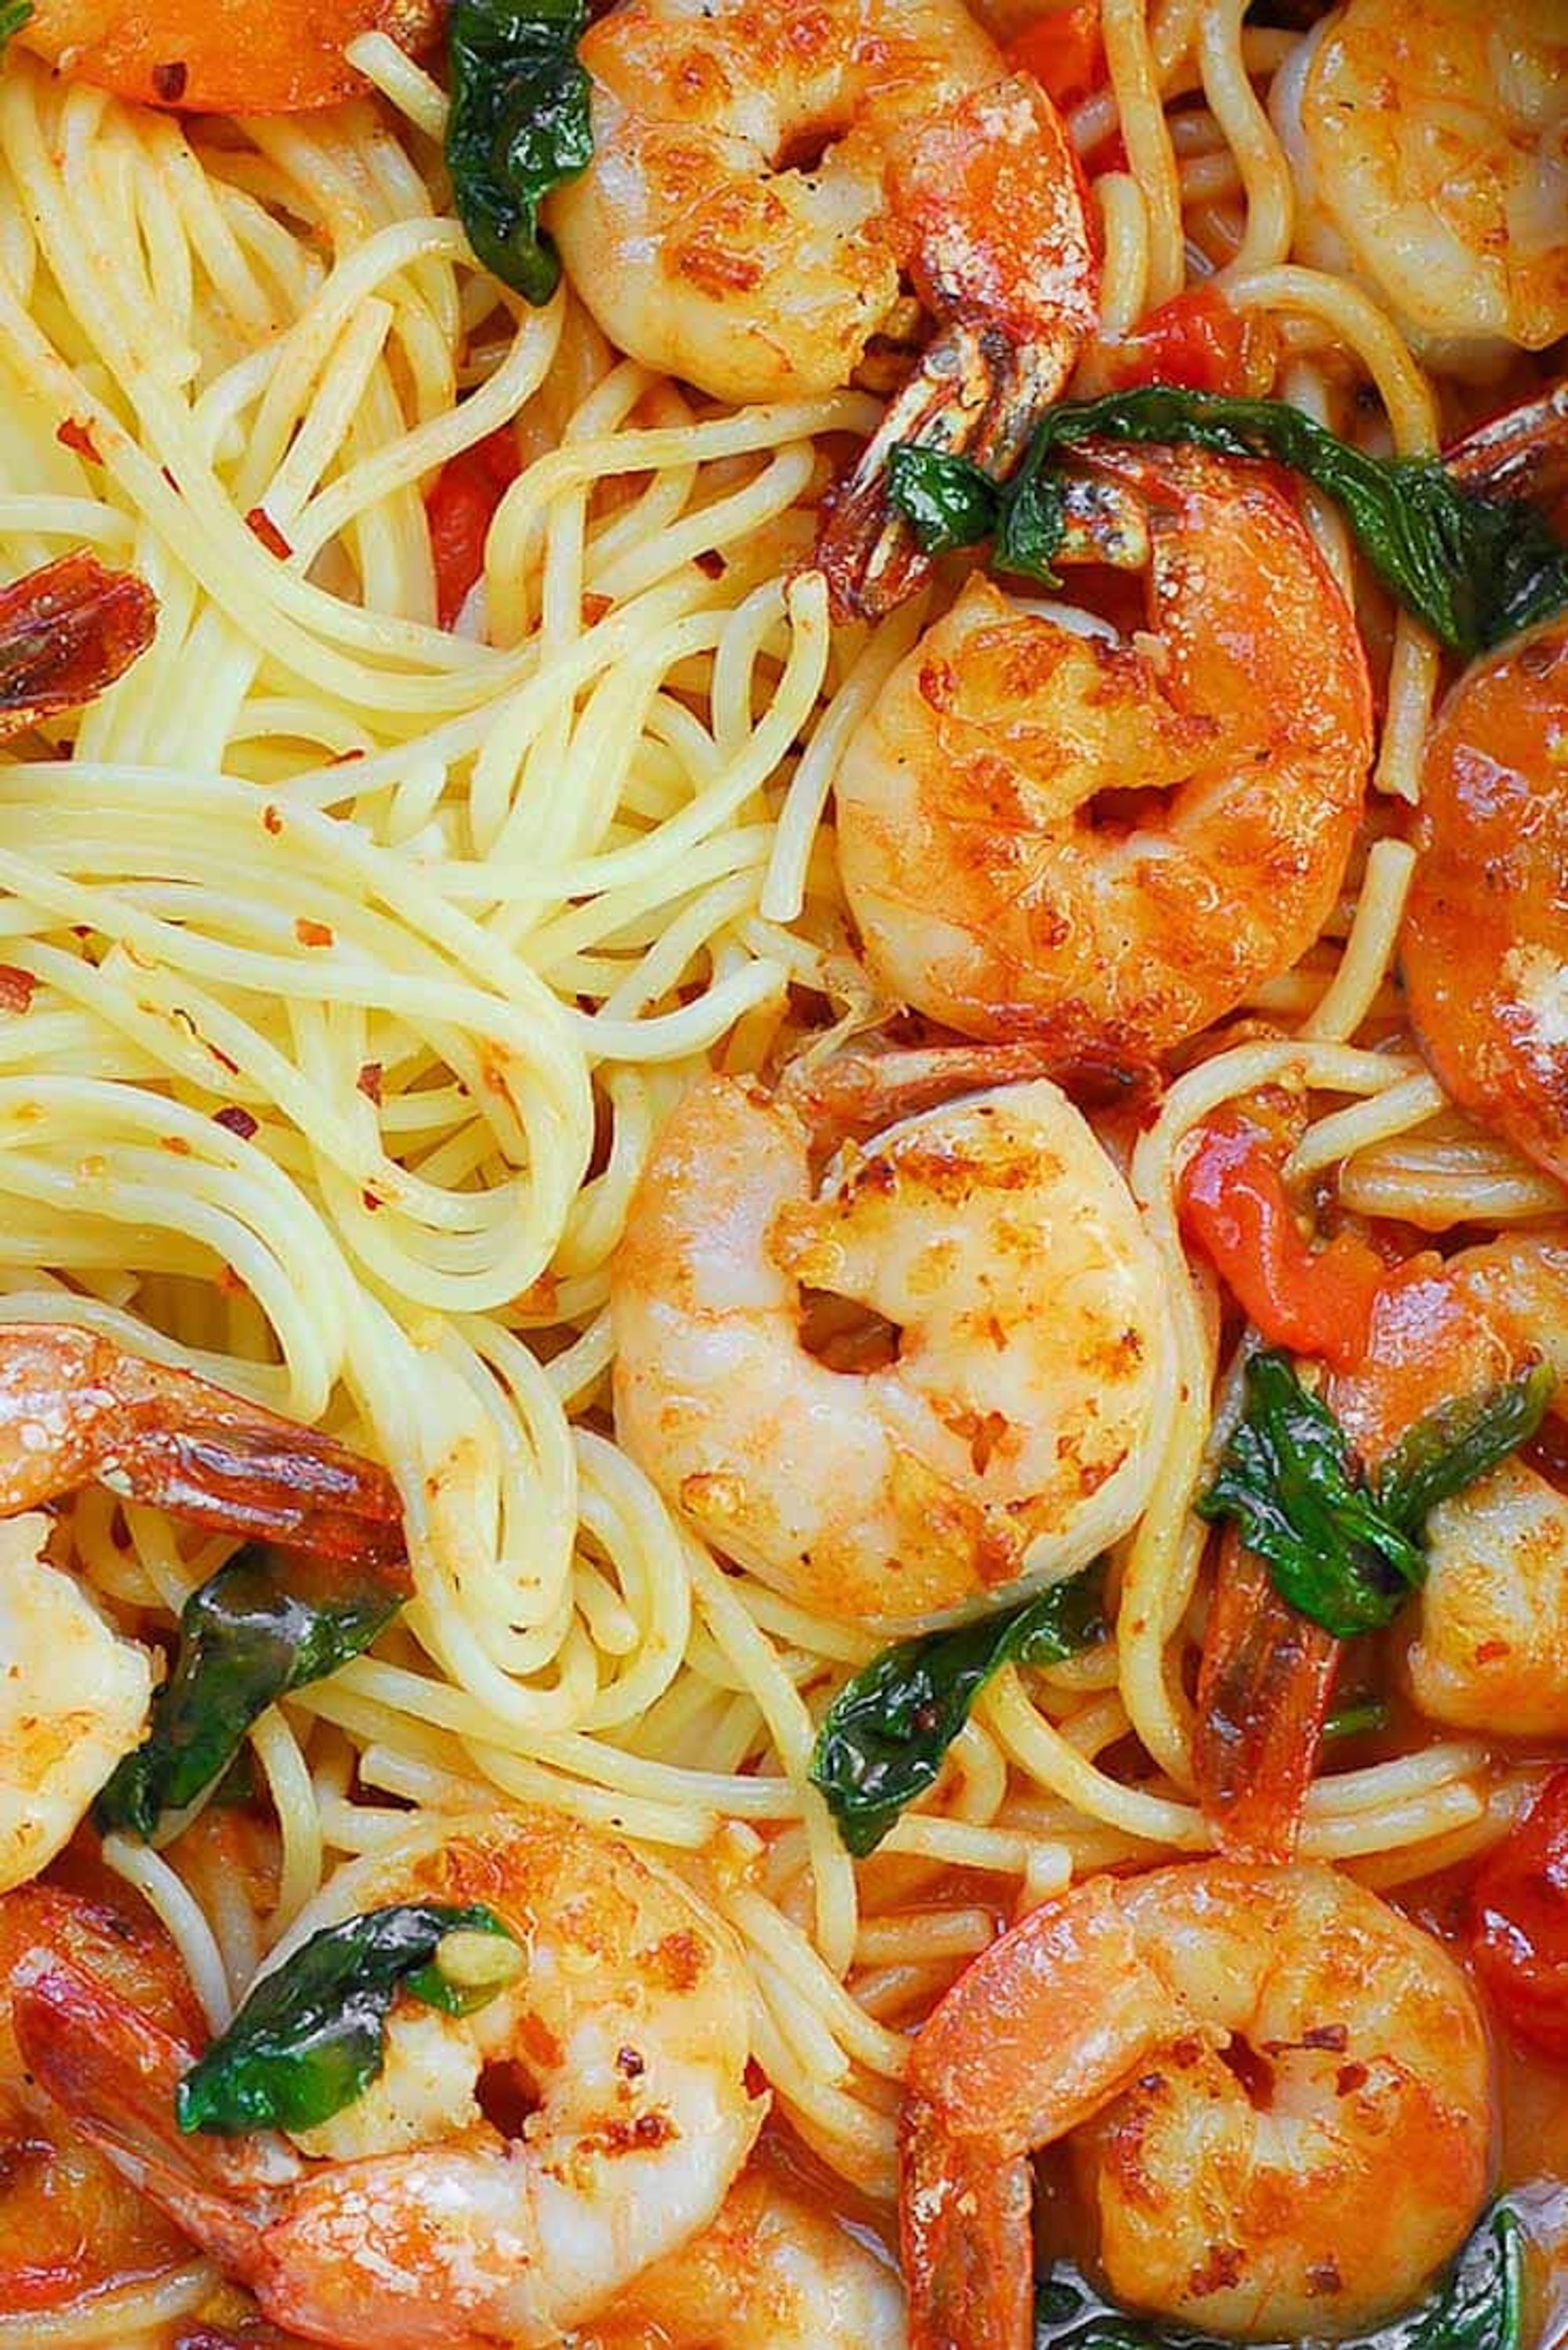 Garlic Shrimp Pasta in Red Wine Tomato Sauce - What's In The Pan? - My ...